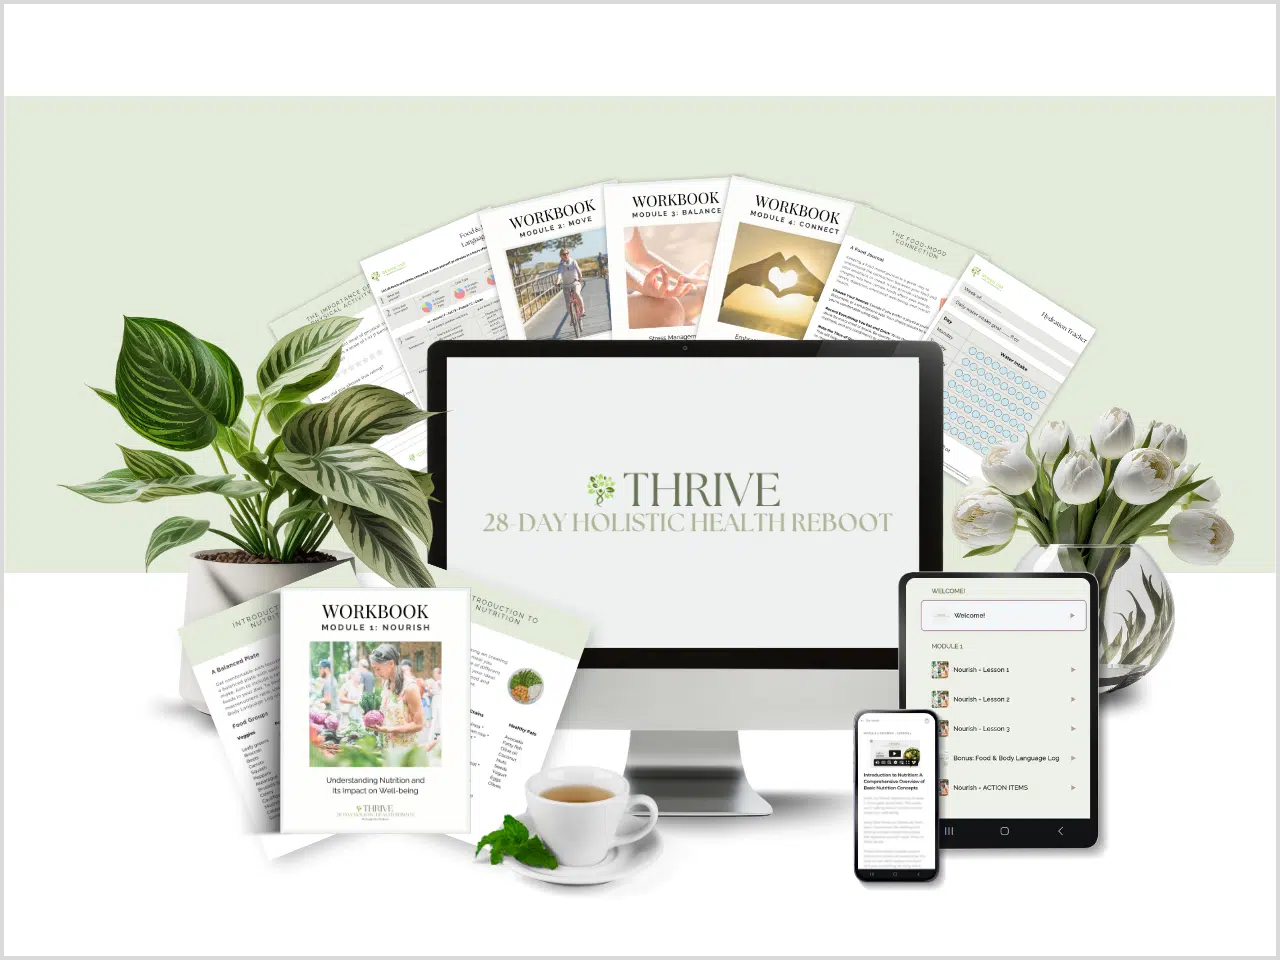 Thrive 28-Day Holistic Health Reboot online course